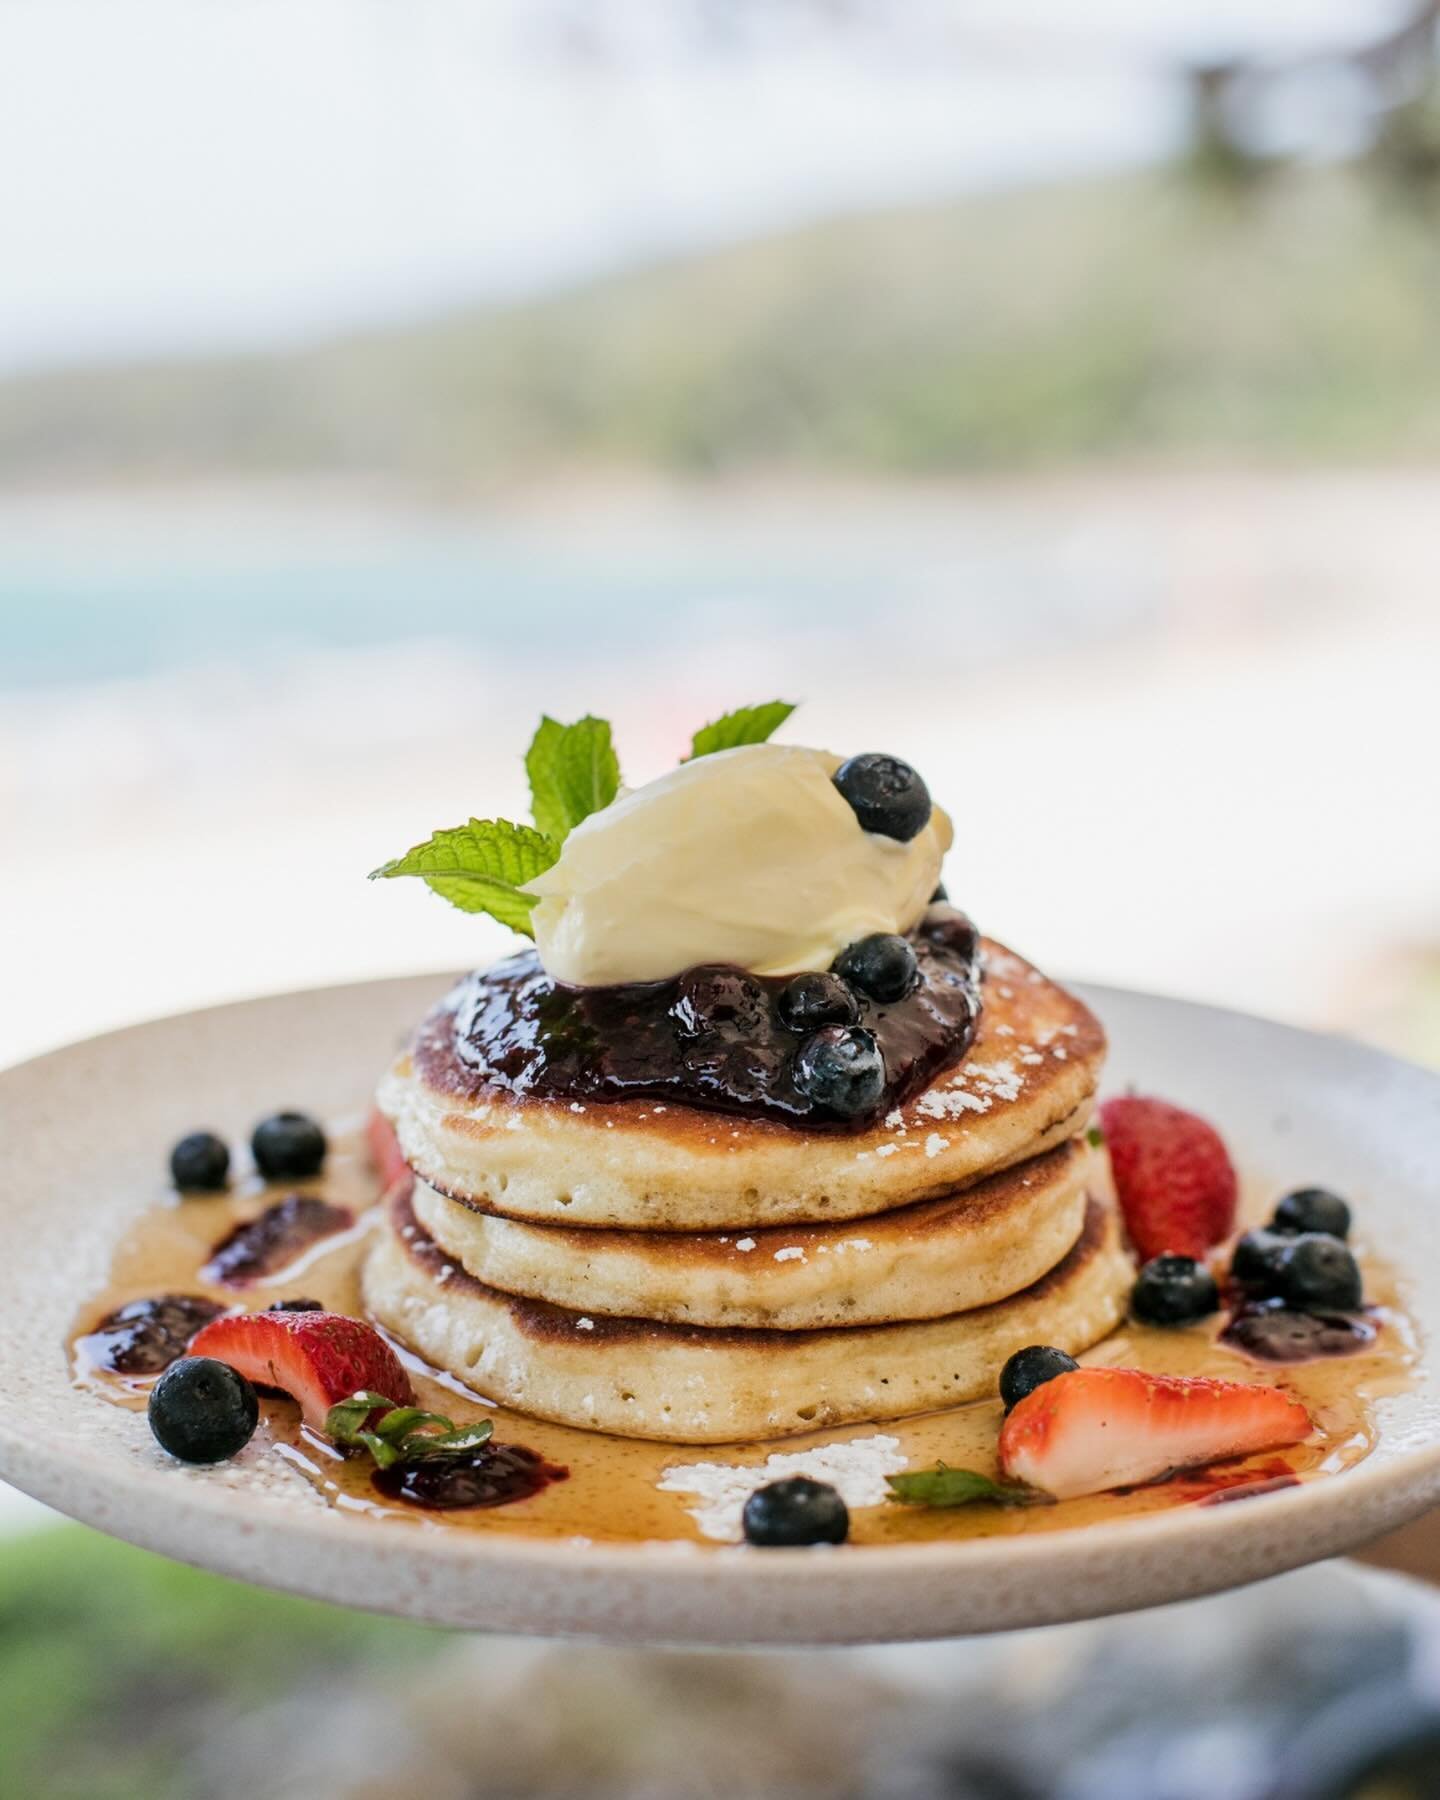 Long weekend vibes ✨ Fluffy pancakes and locally roasted coffee from @guncottoncoffeeroasters.

We will be open tomorrow for Labour Day from 6.30am until late (public holiday surcharge applies).

.
.
.

#longweekendvibes #labourdayweekend #breakfast 